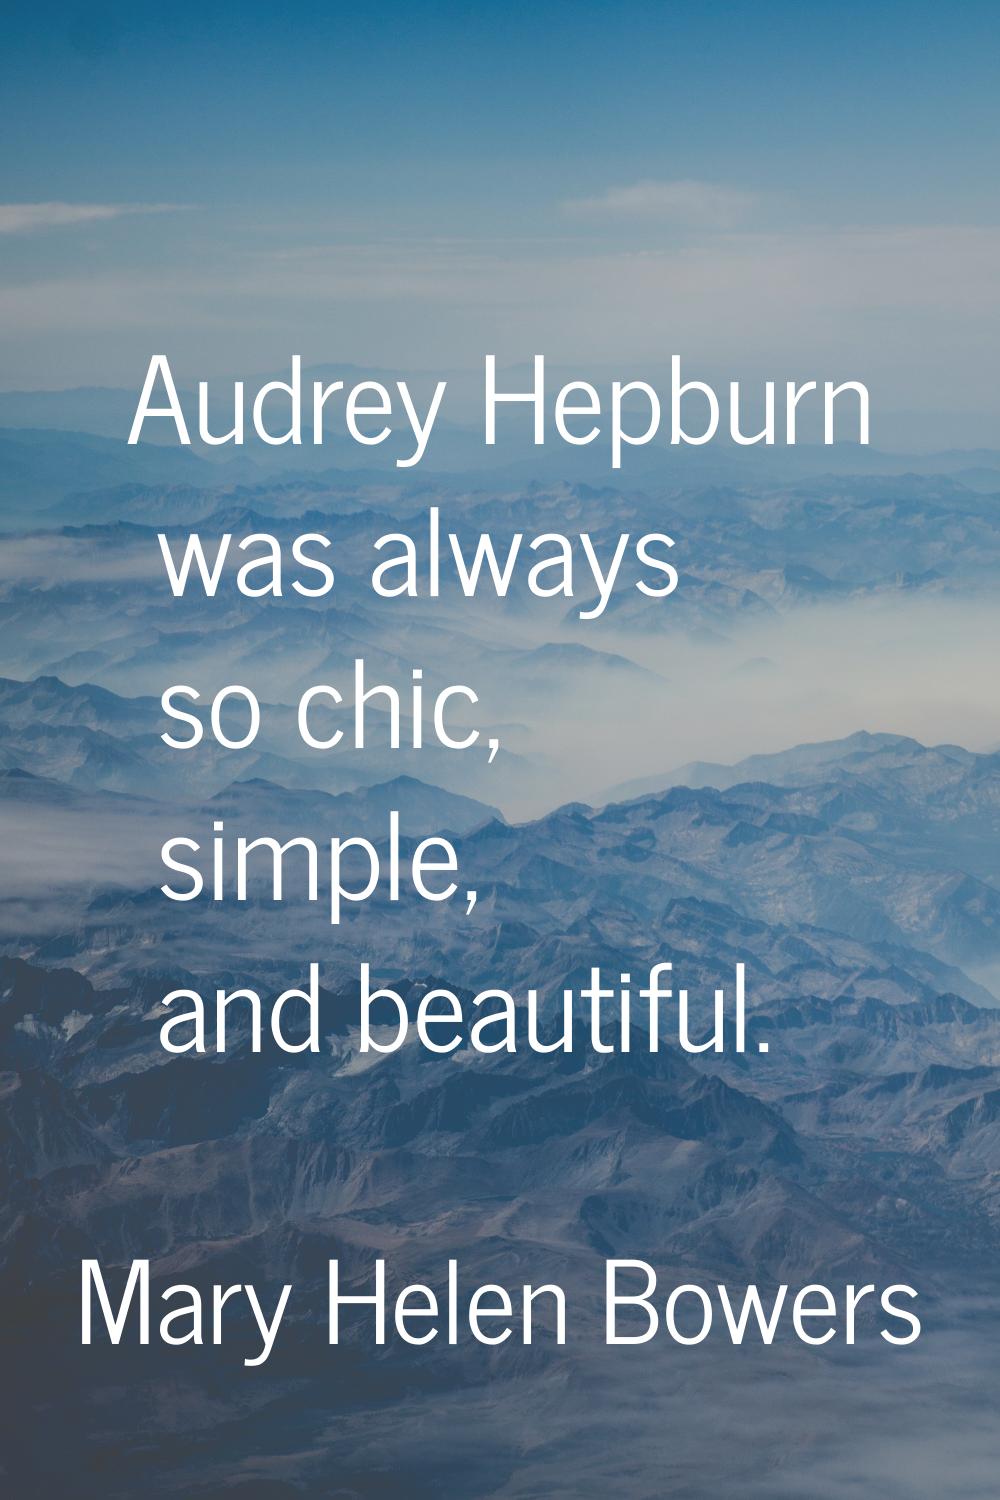 Audrey Hepburn was always so chic, simple, and beautiful.